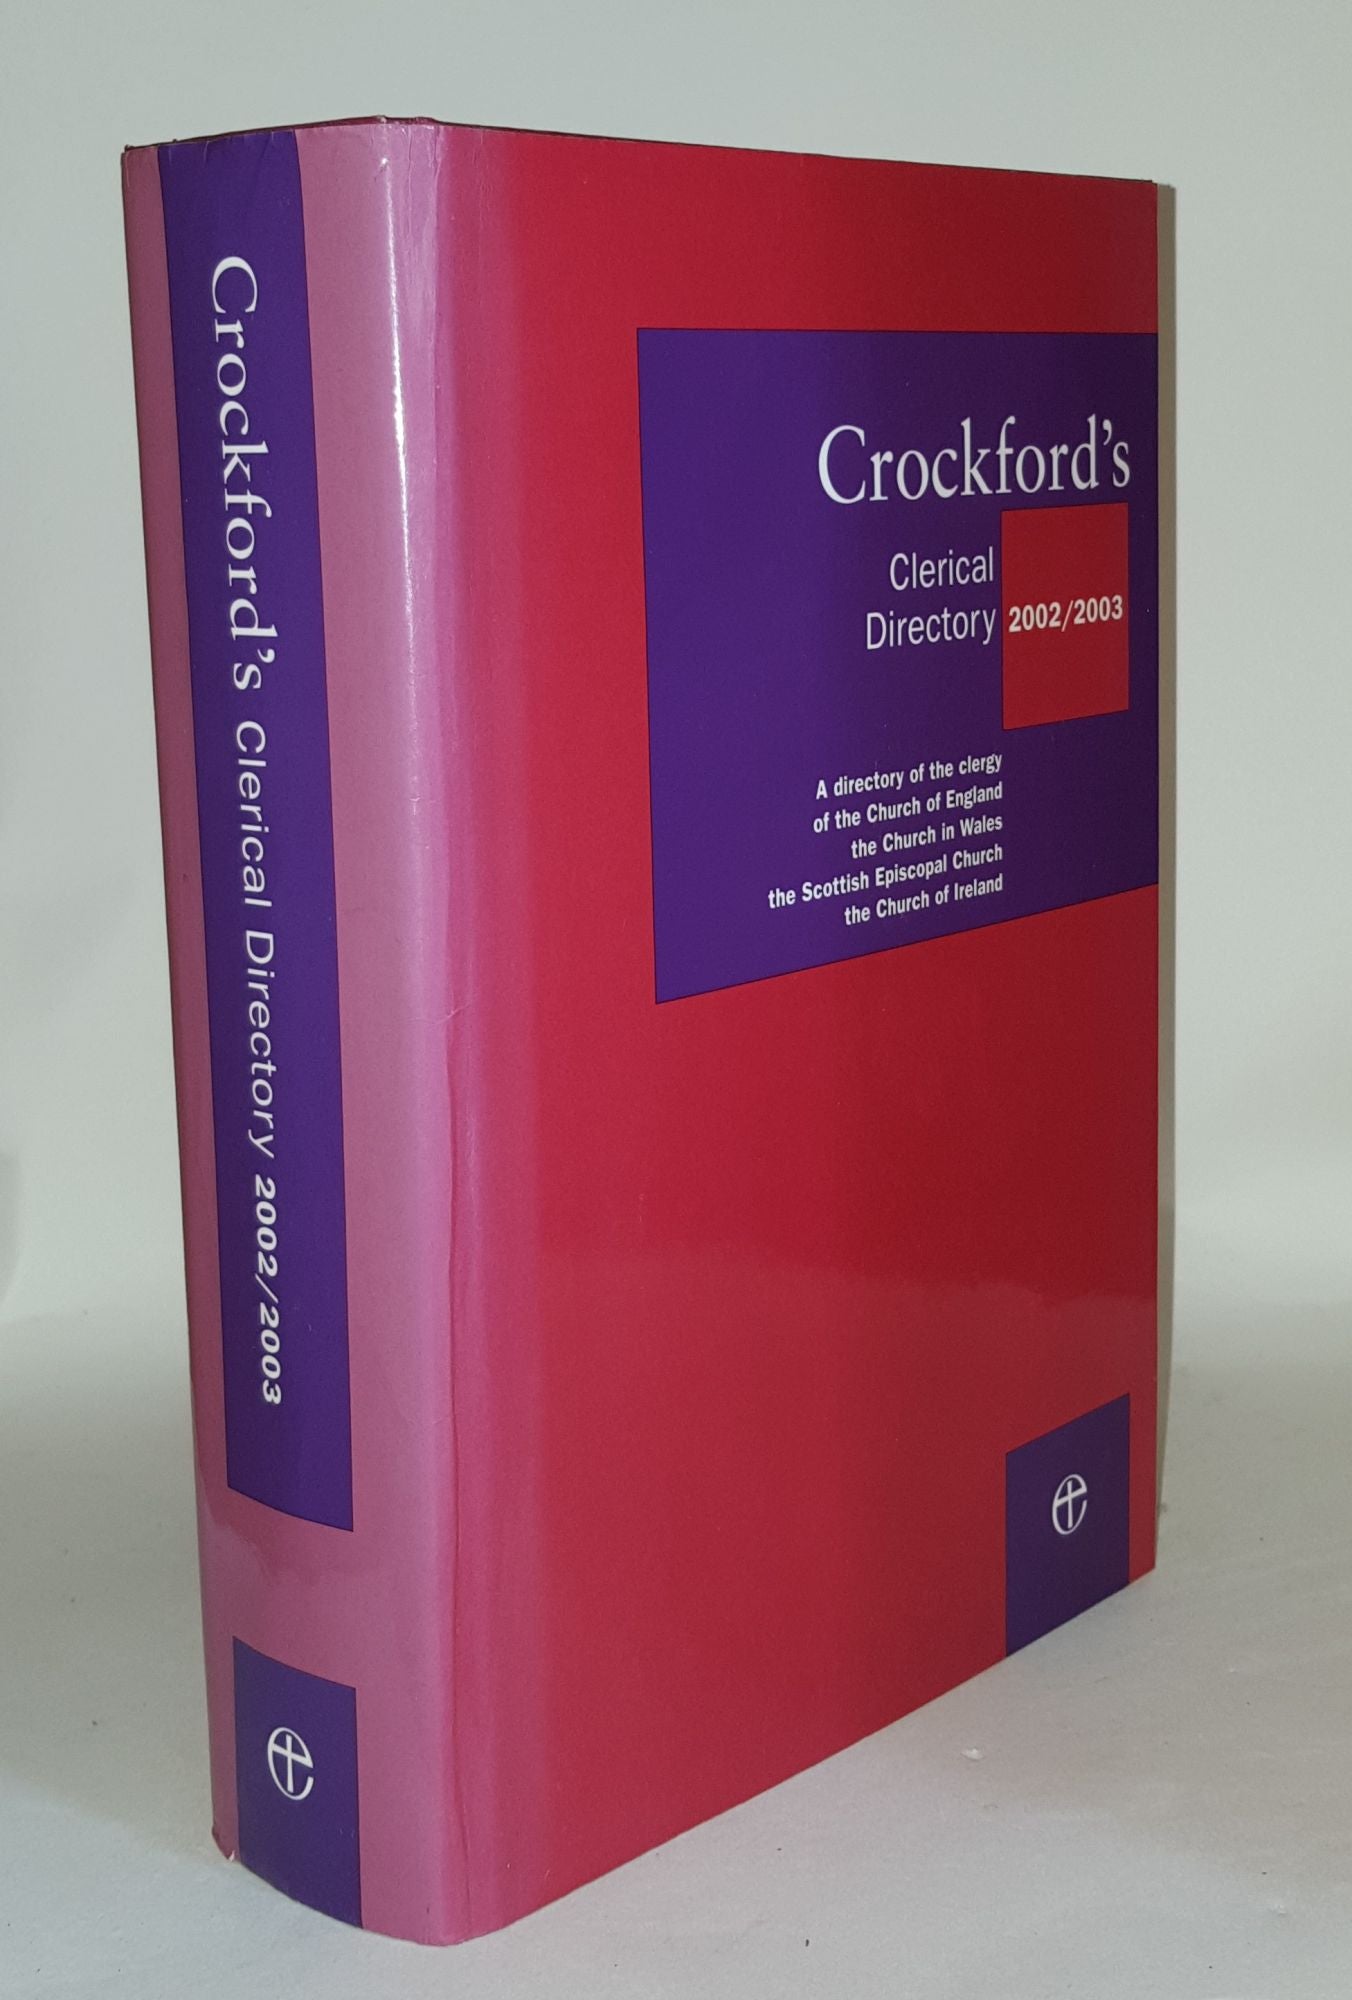 Anon - Crockford's Clerical Directory 2002-2003